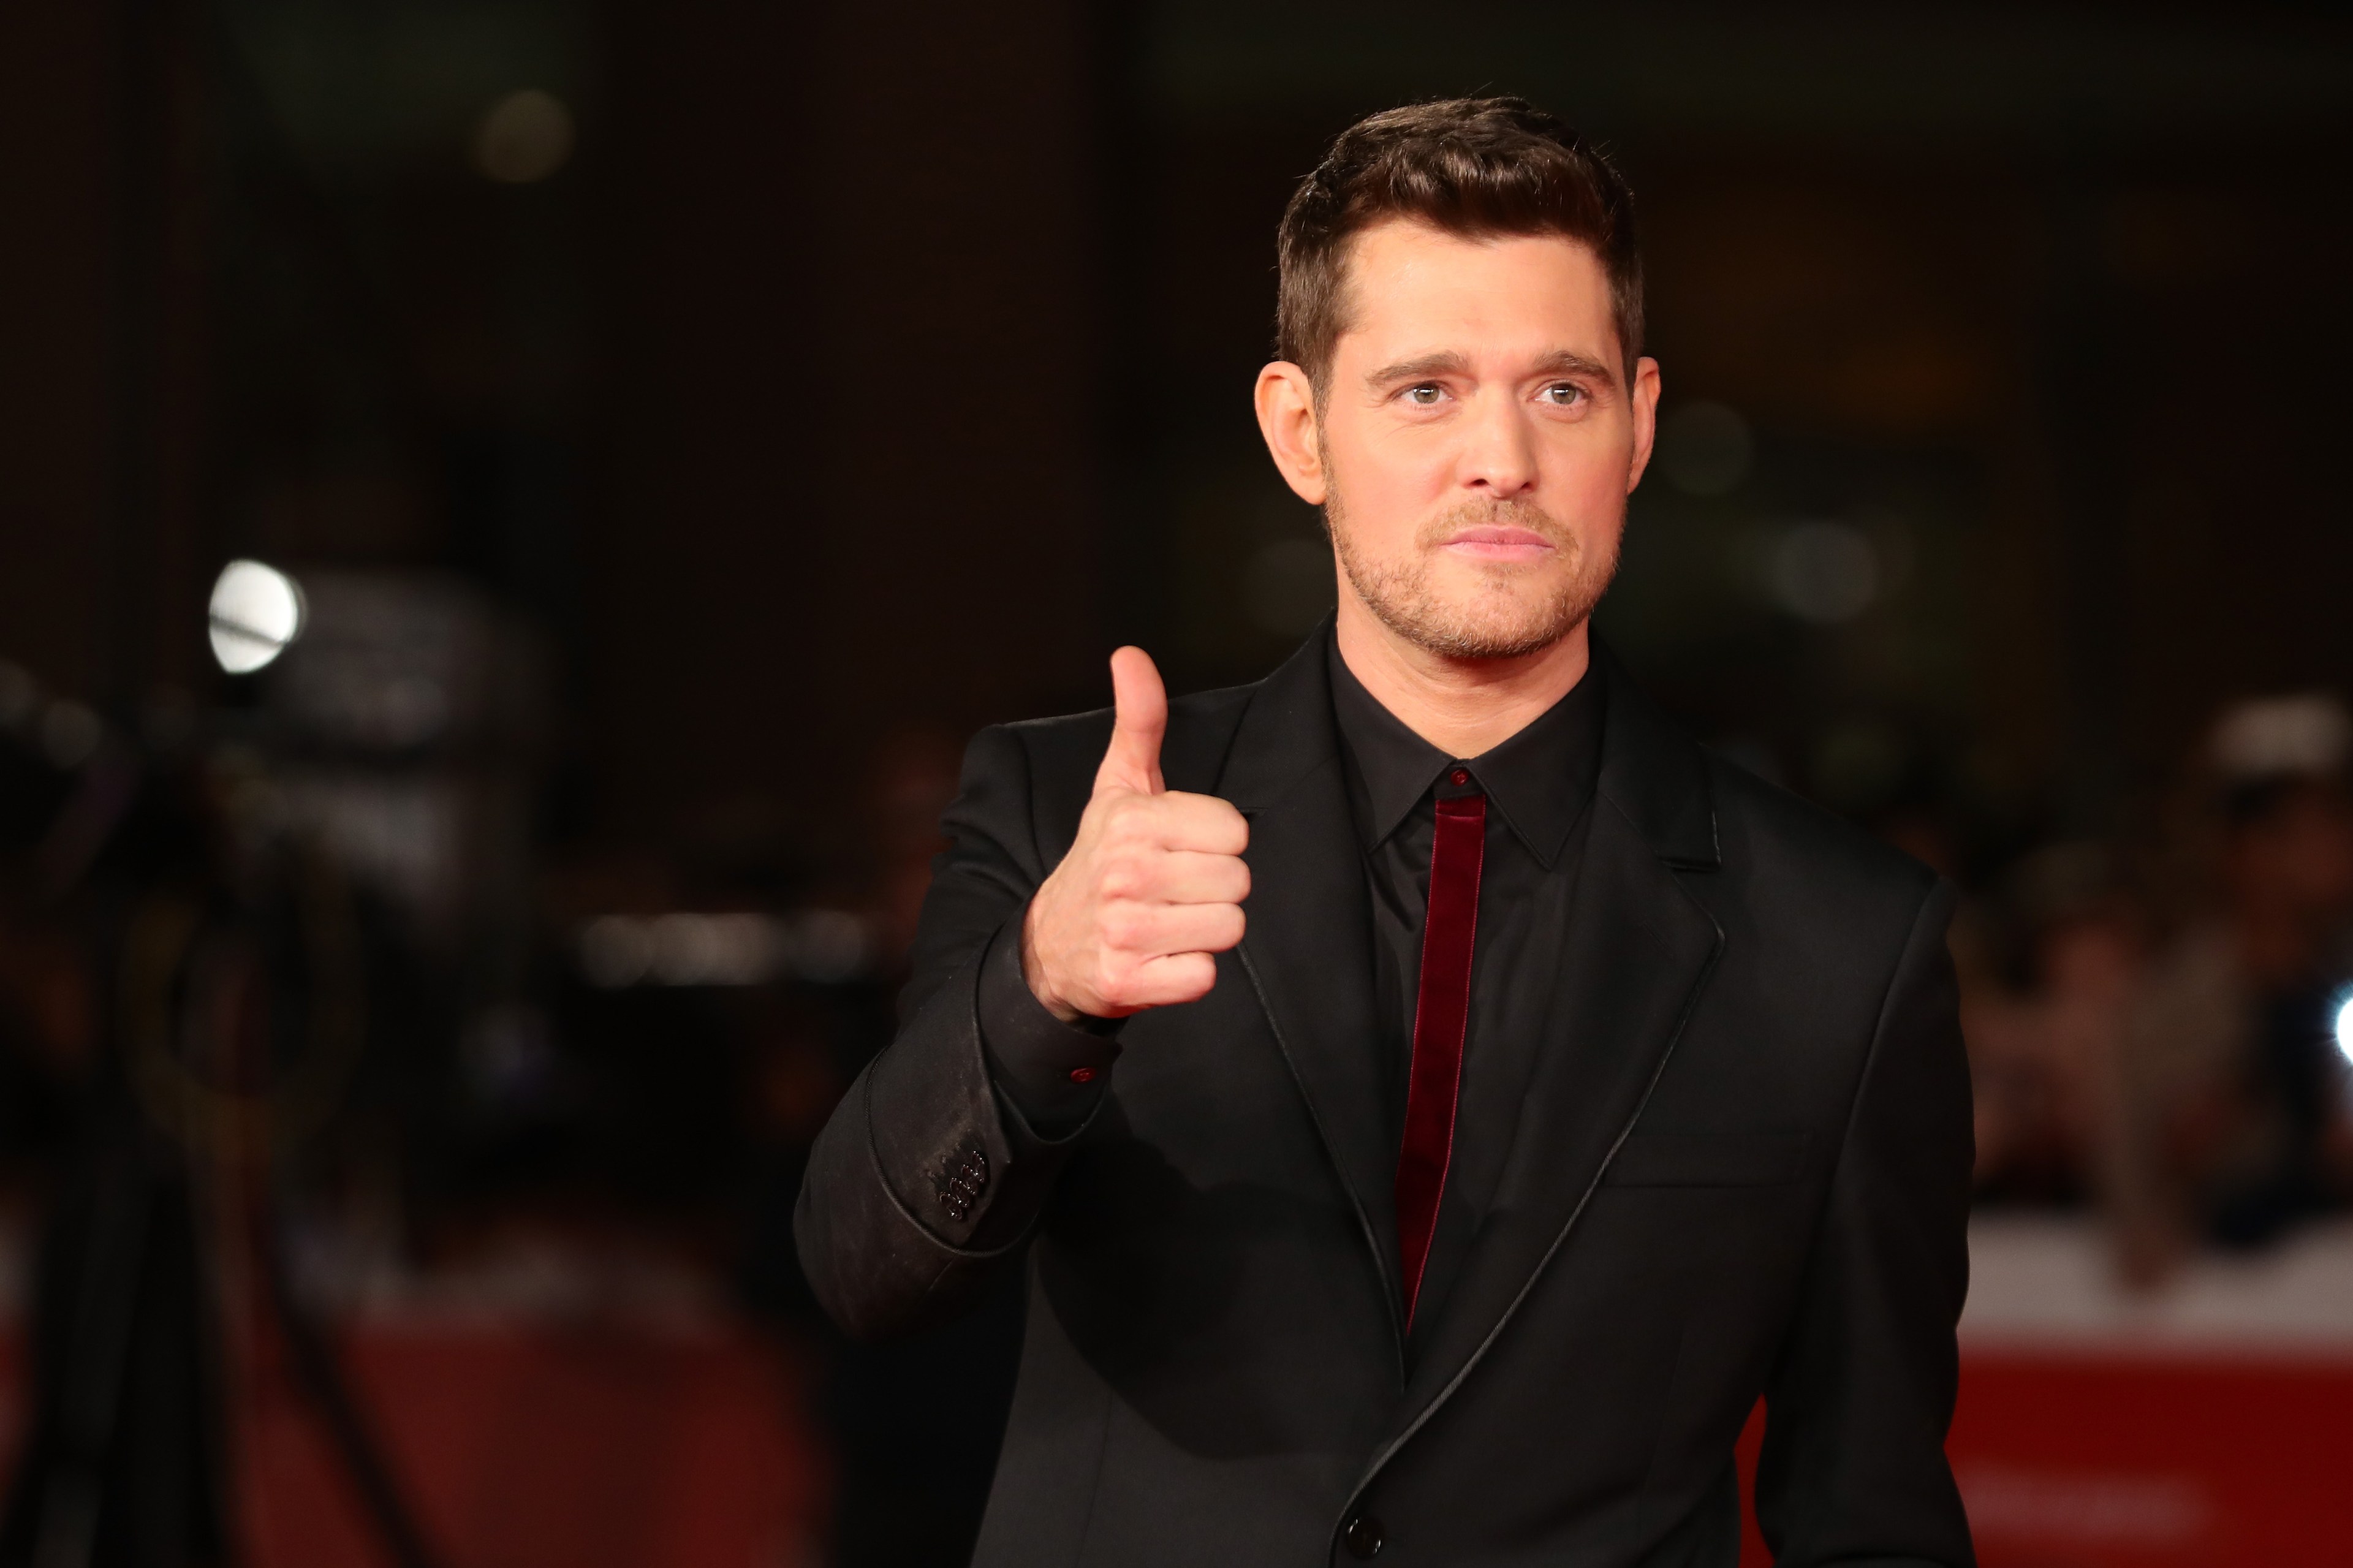 Michael Buble walks a red carpet for 'Tour Stop 148' during the 11th Rome Film Festival at Auditorium Parco Della Musica on October 14, 2016 in Rome, Italy.